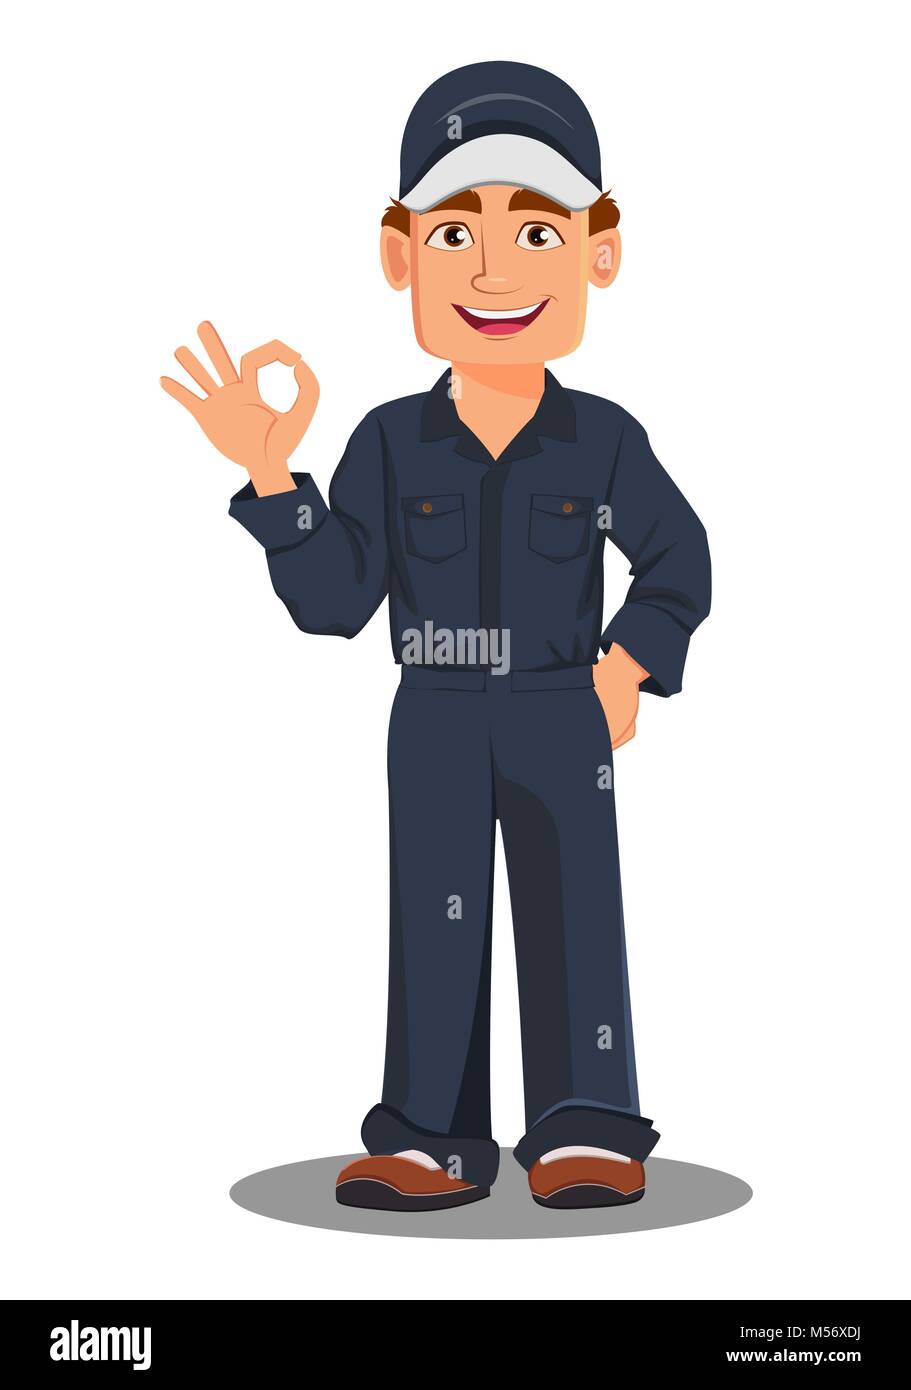 Professional auto mechanic in uniform. Smiling cartoon character showing ok sign. Expert service worker. Vector illustration Stock Vector